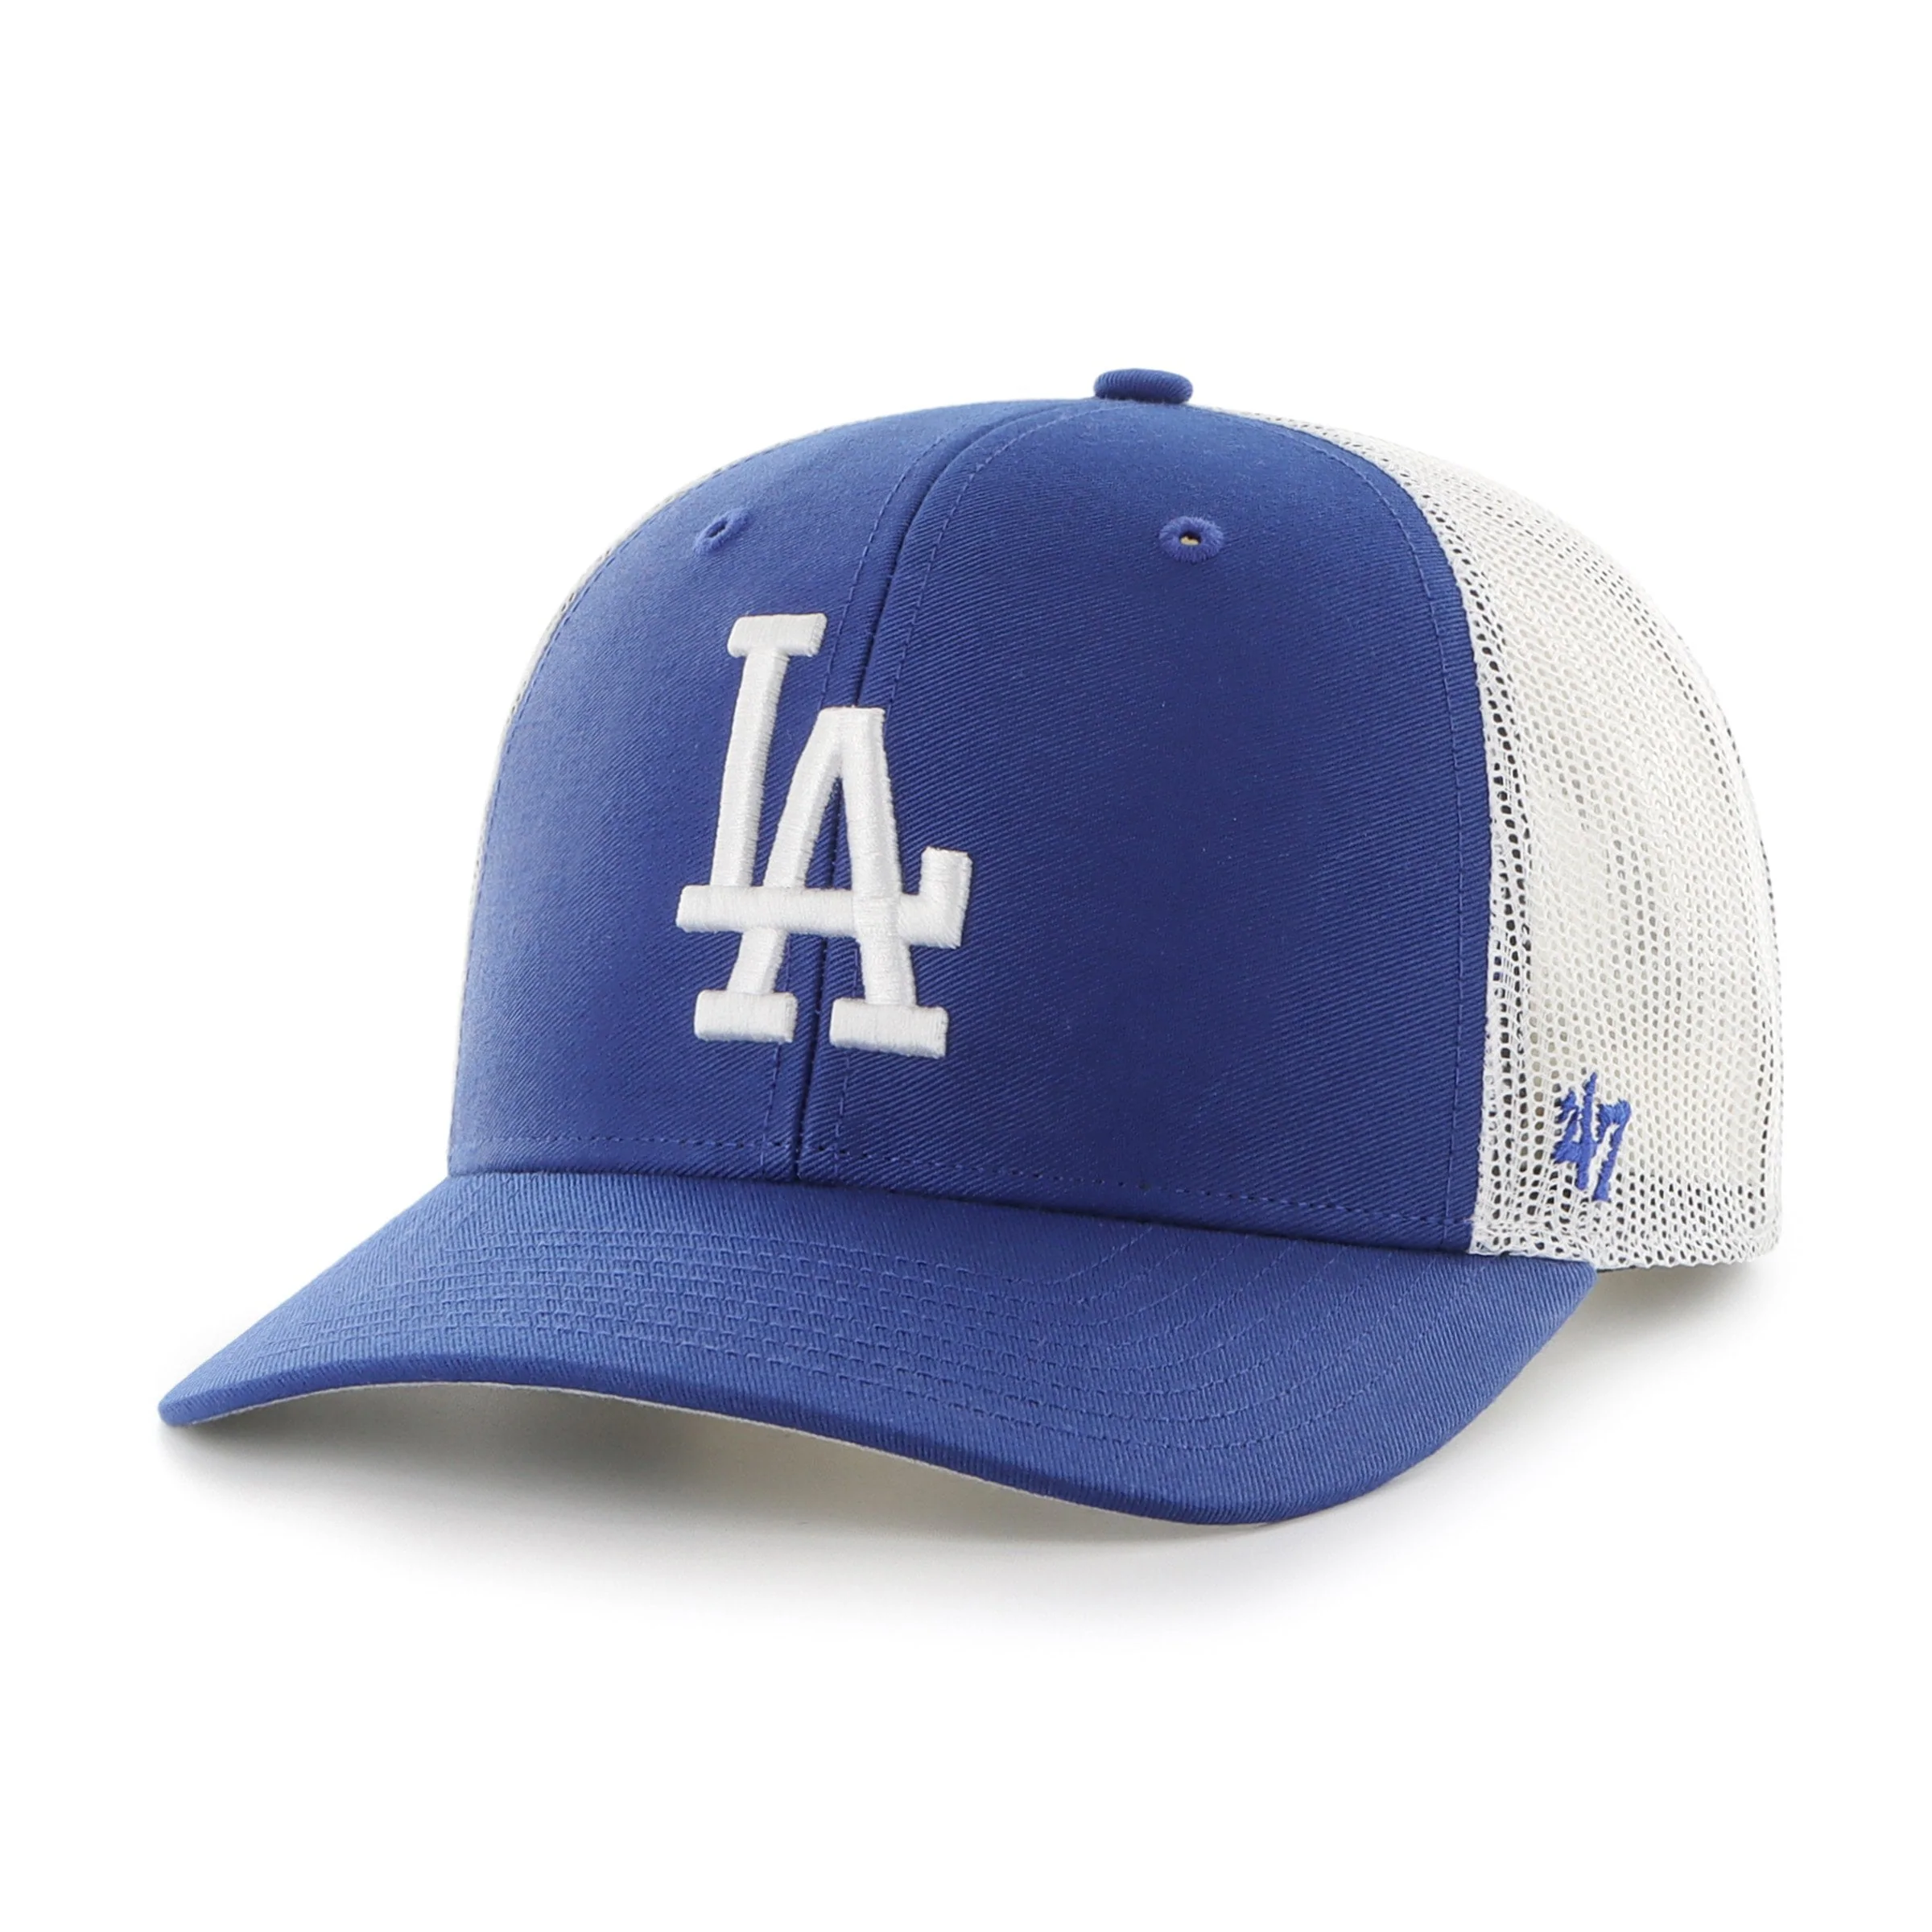  MLB Youth The League LA Dodgers 9Forty Adjustable Cap, Blue :  Sports Fan Baseball Caps : Sports & Outdoors